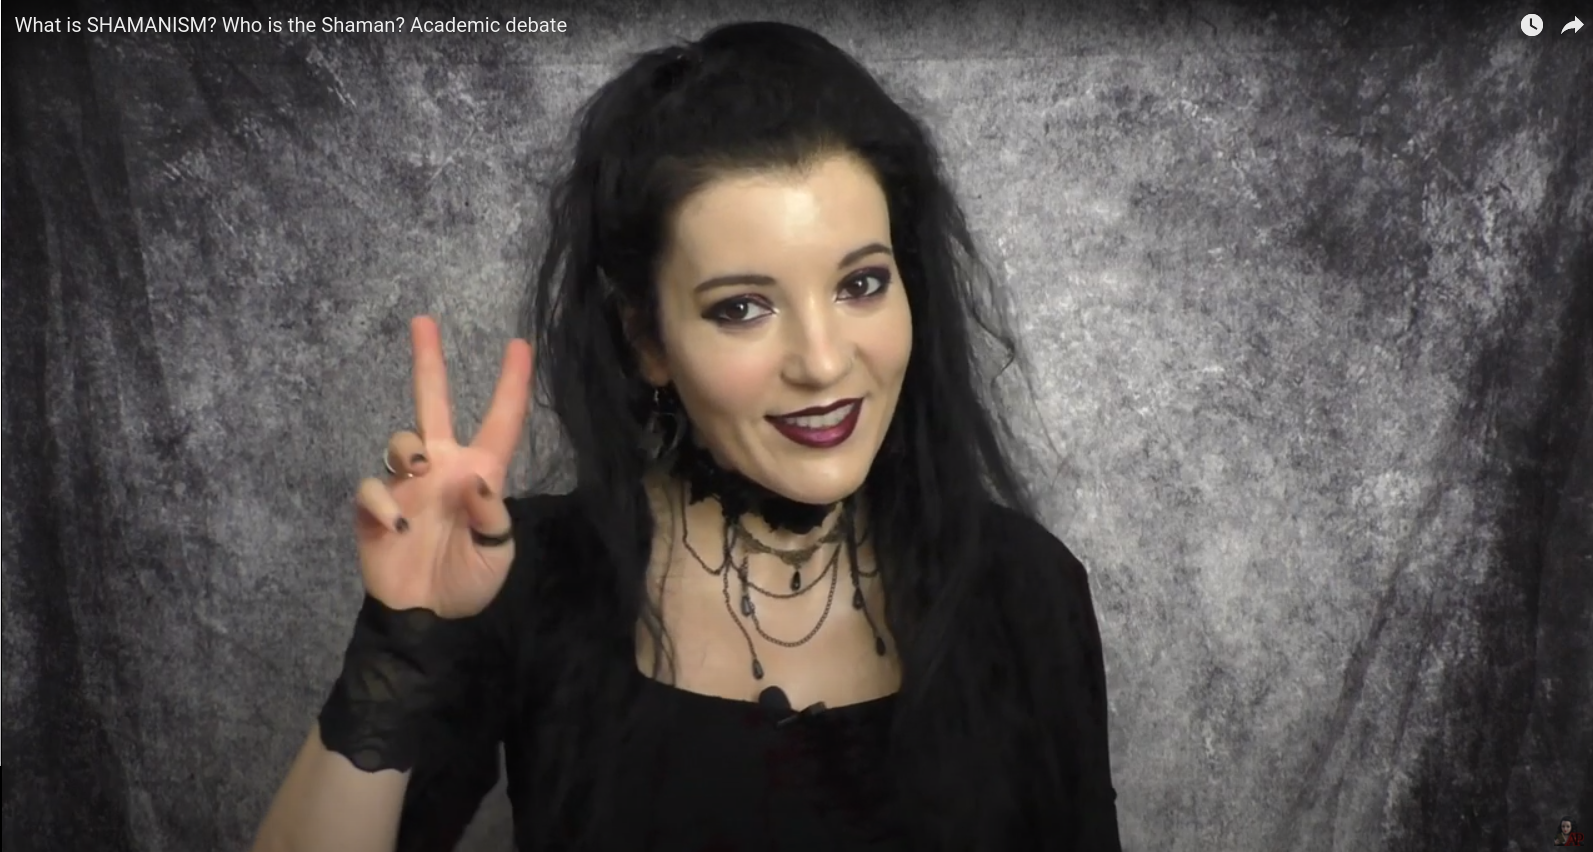 Angela Puca in black with a choker holding two fingers to indicate two